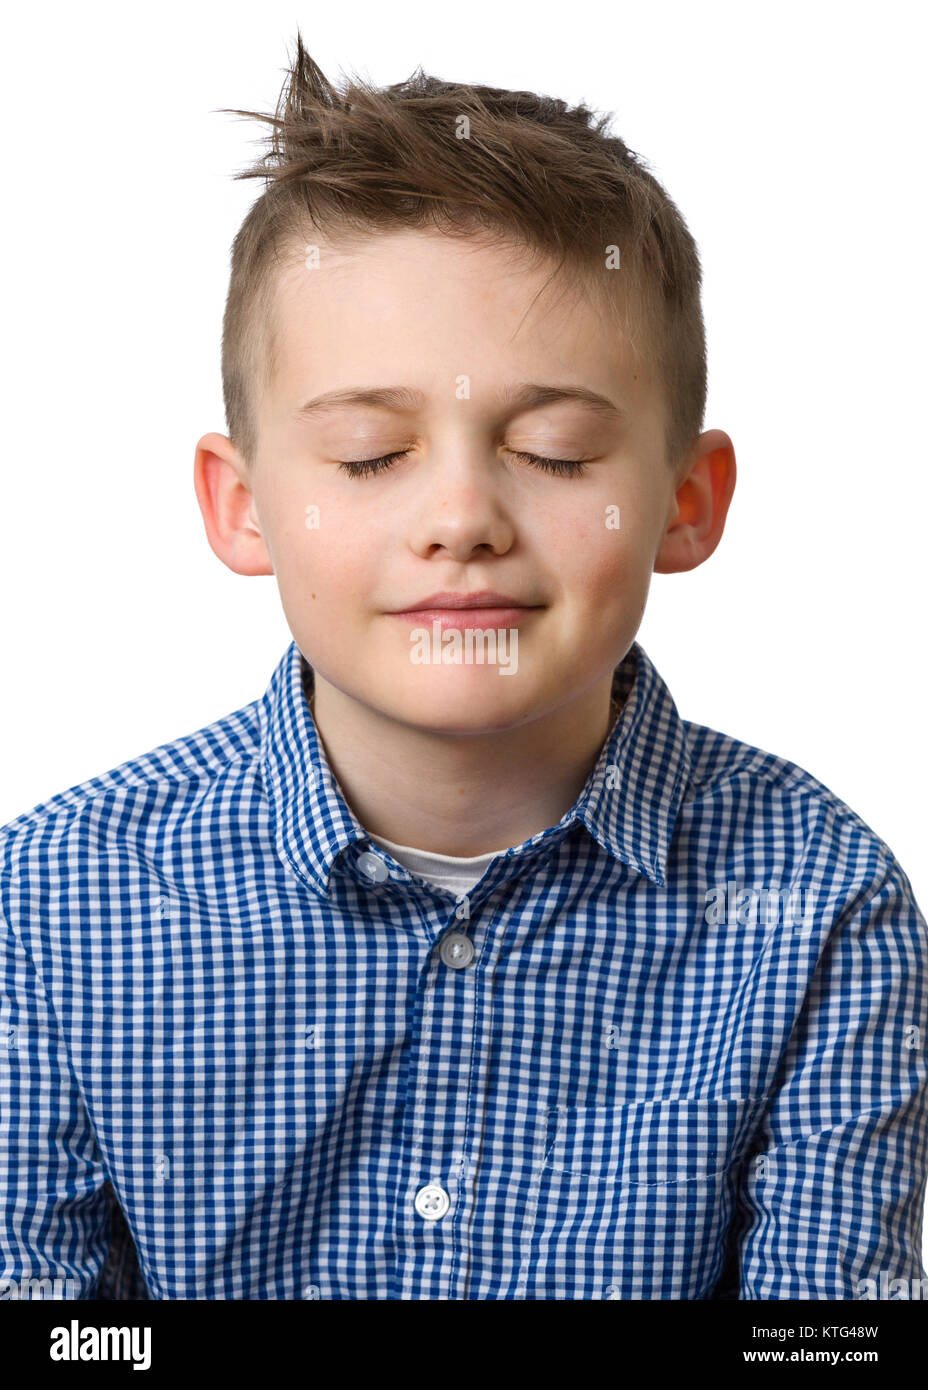 Young caucasian boy with closed eyes head and shoulder portrait isolated on white background  Model Release: Yes.  Property Release: No. Stock Photo